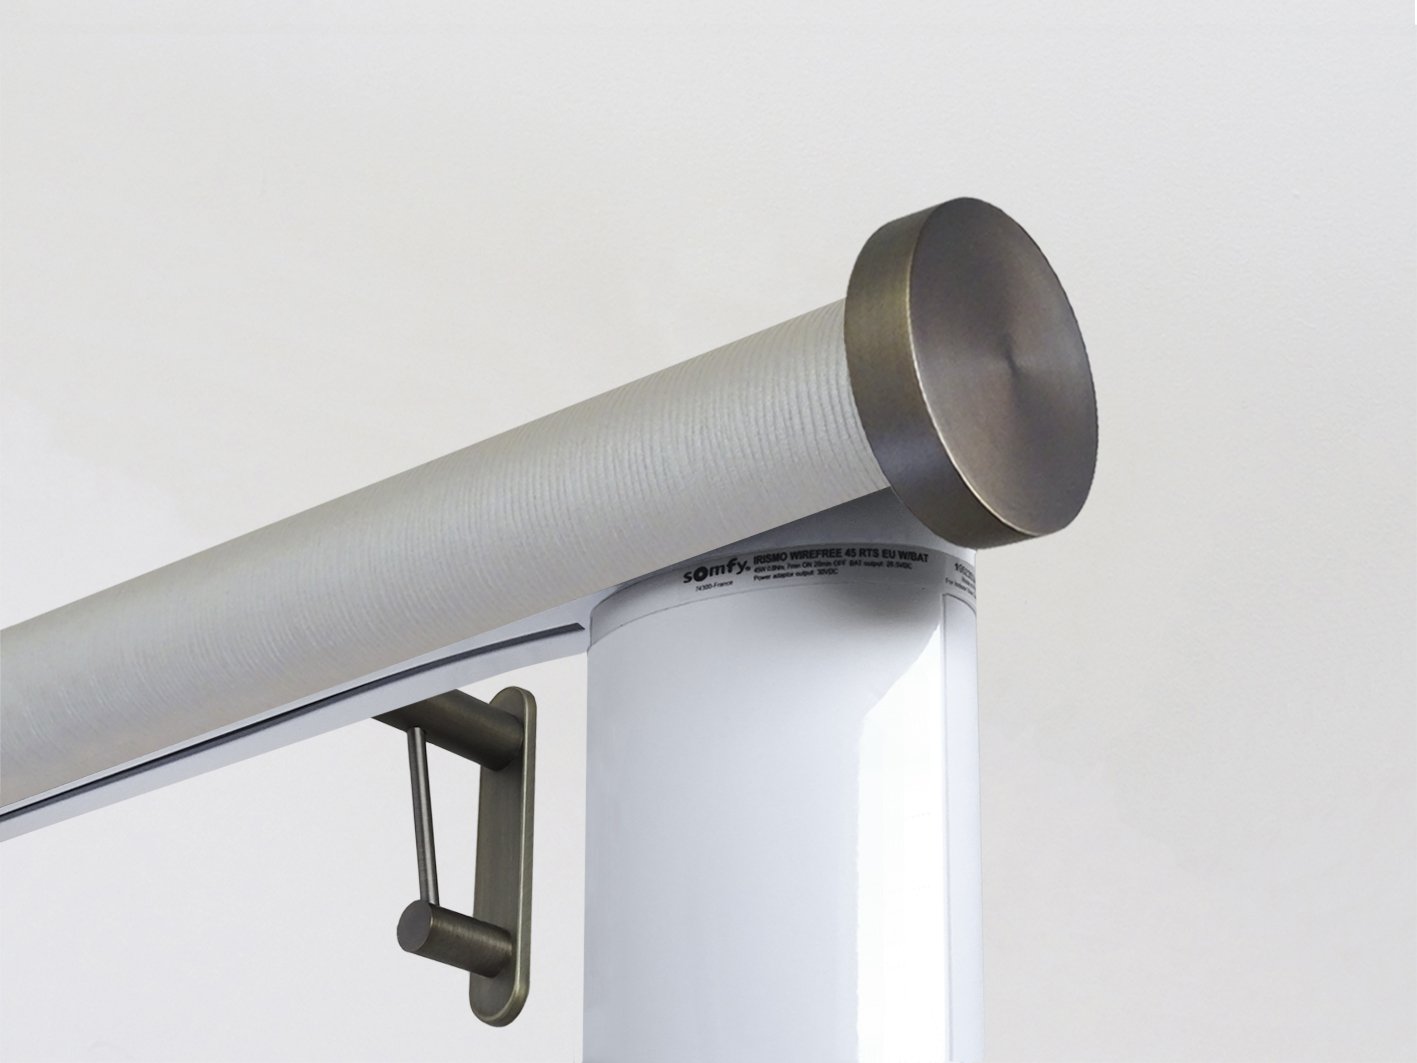 Motorised electric curtain pole in marcasite grey, wireless & battery powered using the Somfy Glydea track | Walcot House UK curtain pole specialists